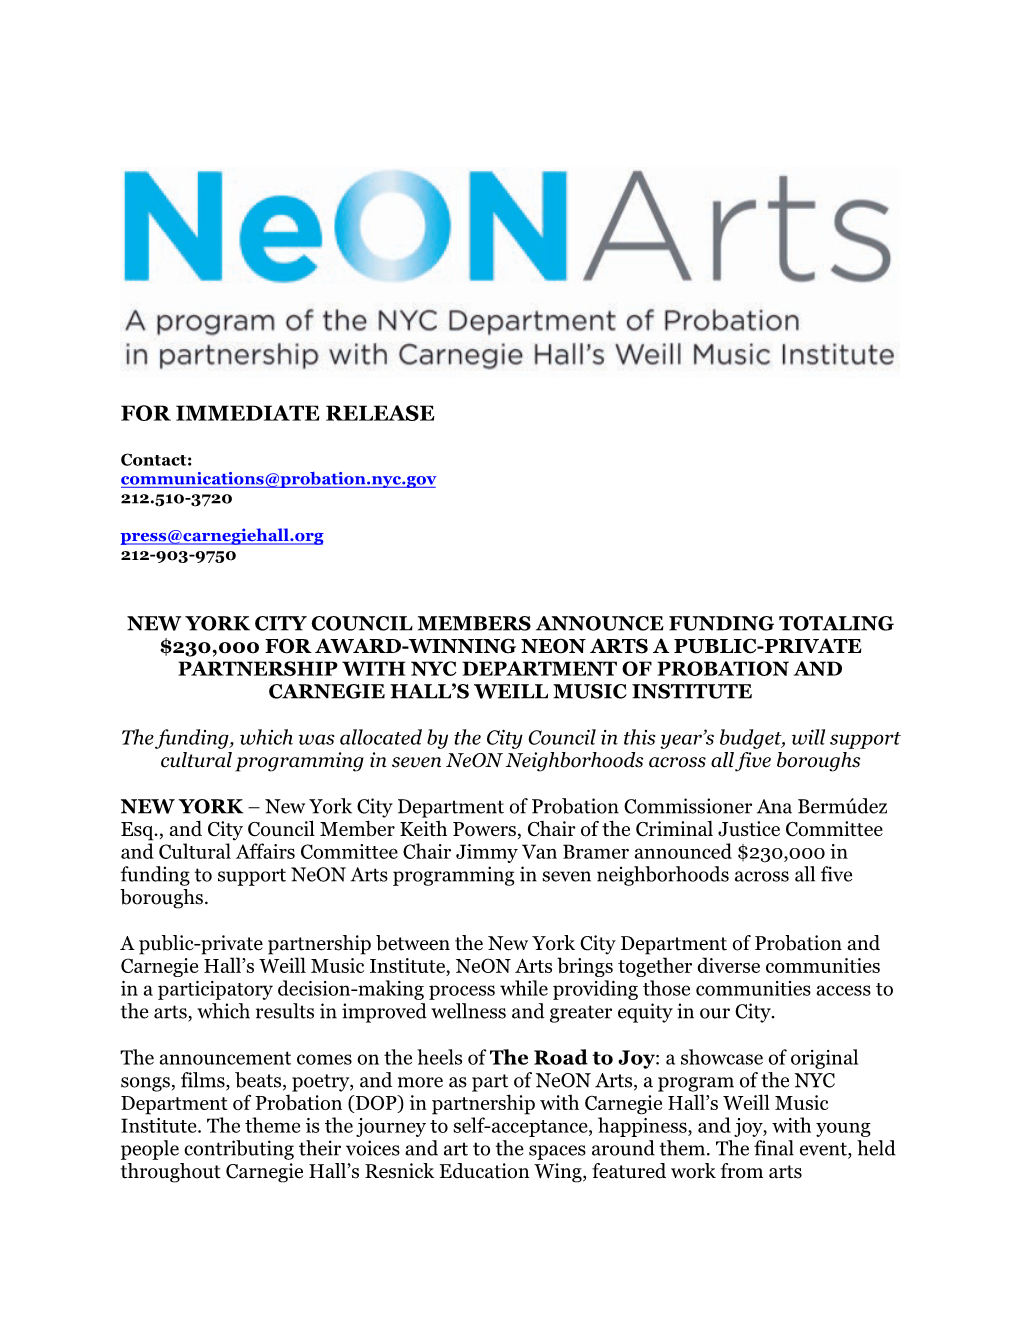 New York City Council Members Announce Funding Totaling $230000 for Award-Winning Neon Arts a Public